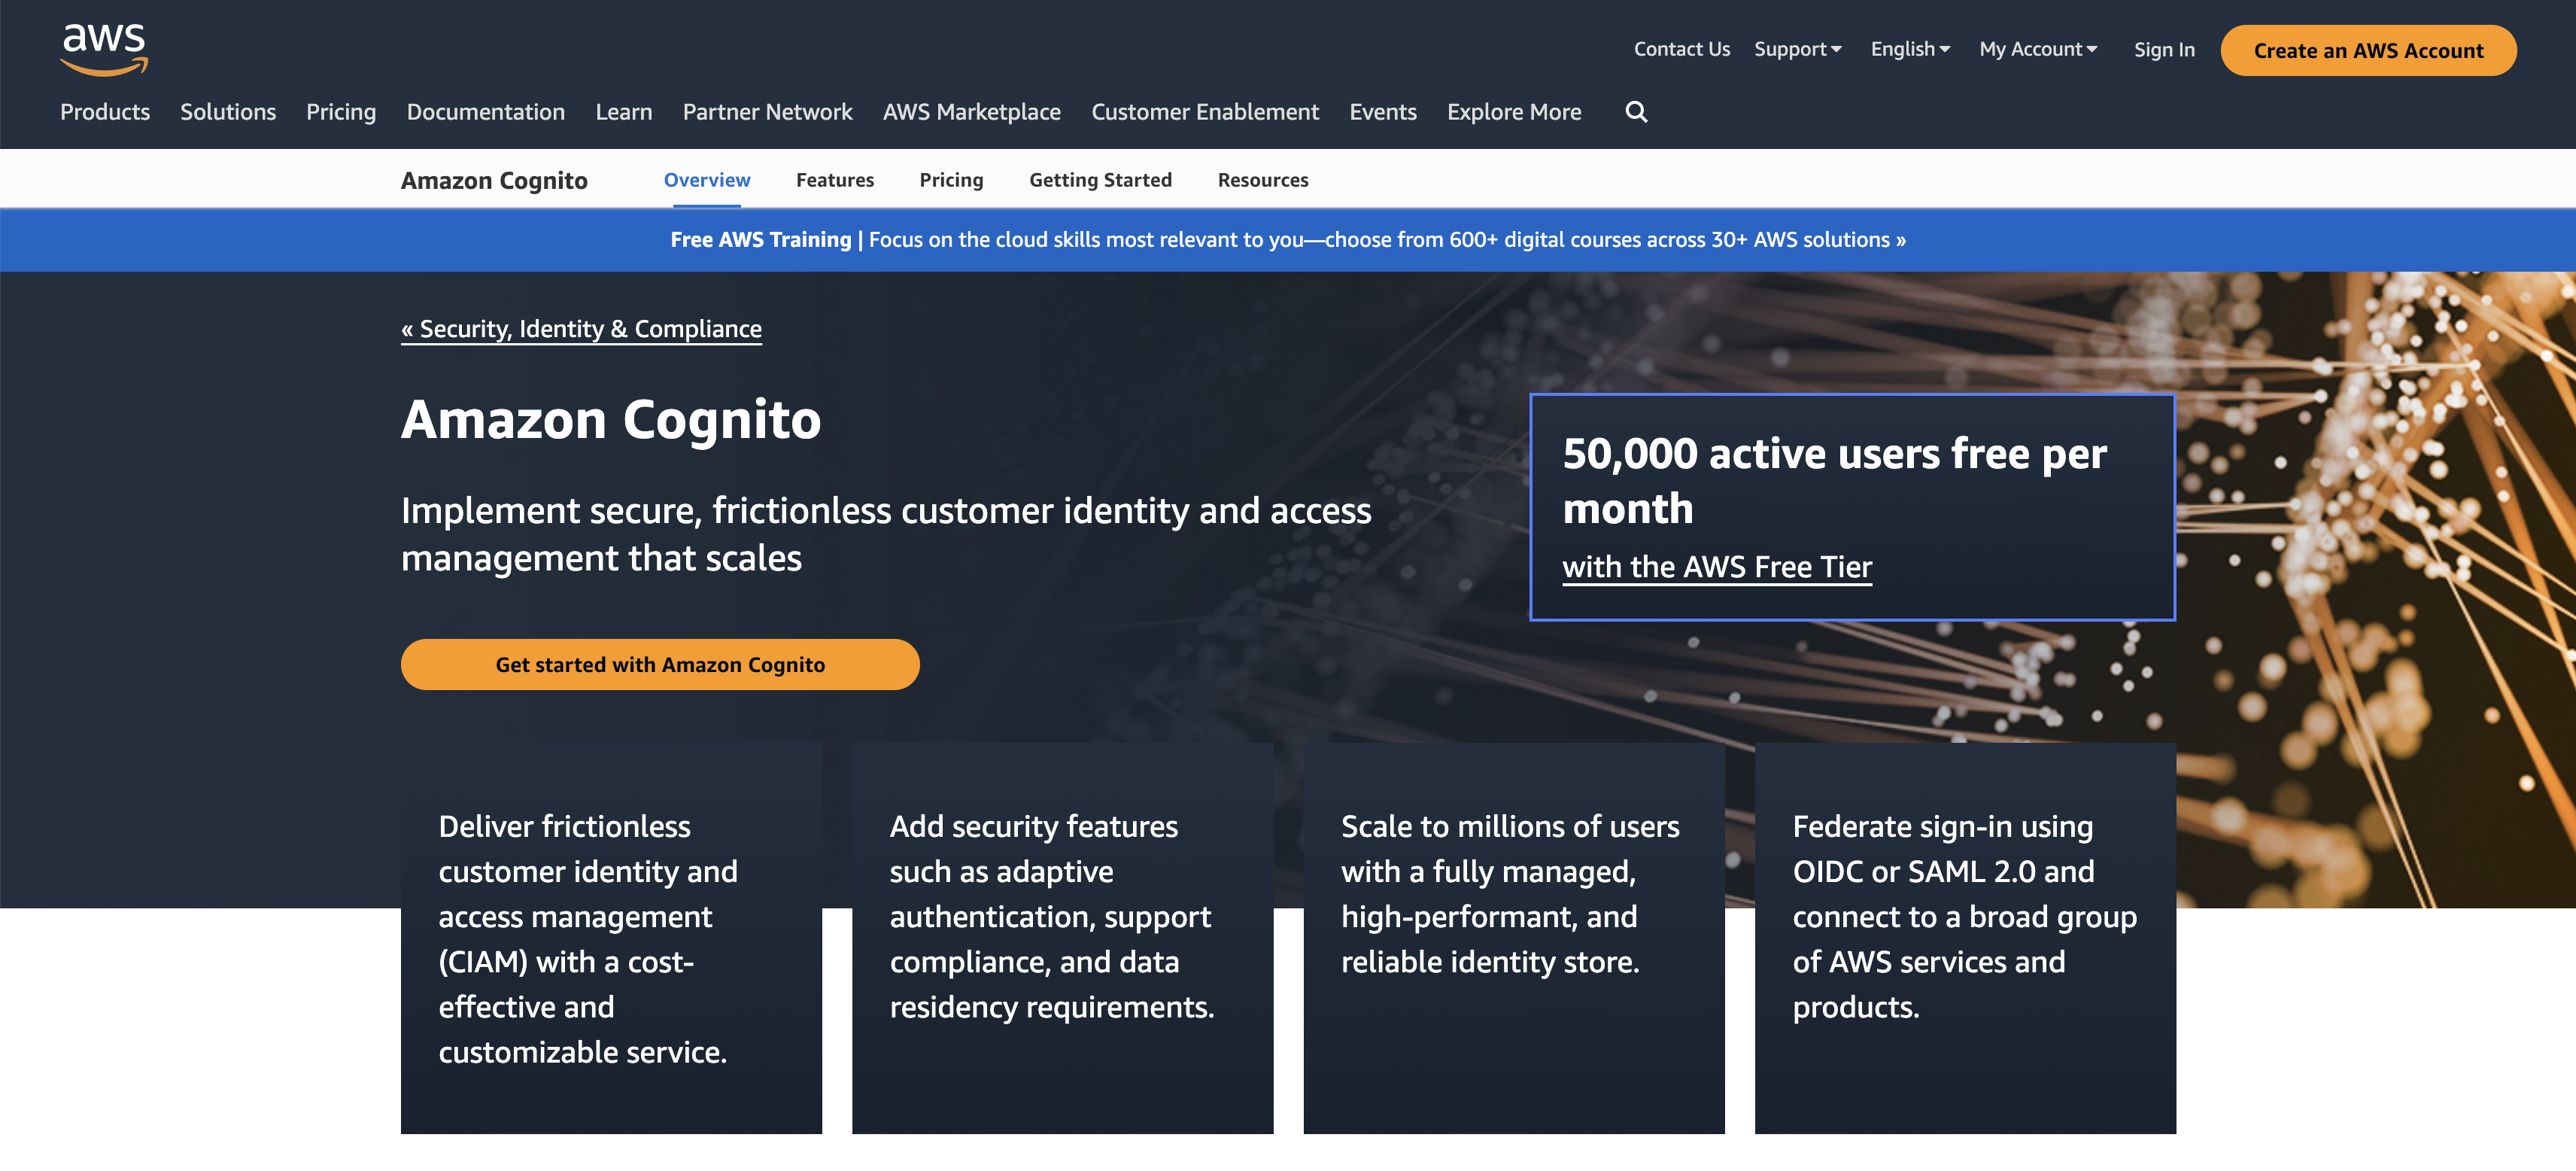 A screenshot of the Amazon Cognito homepage